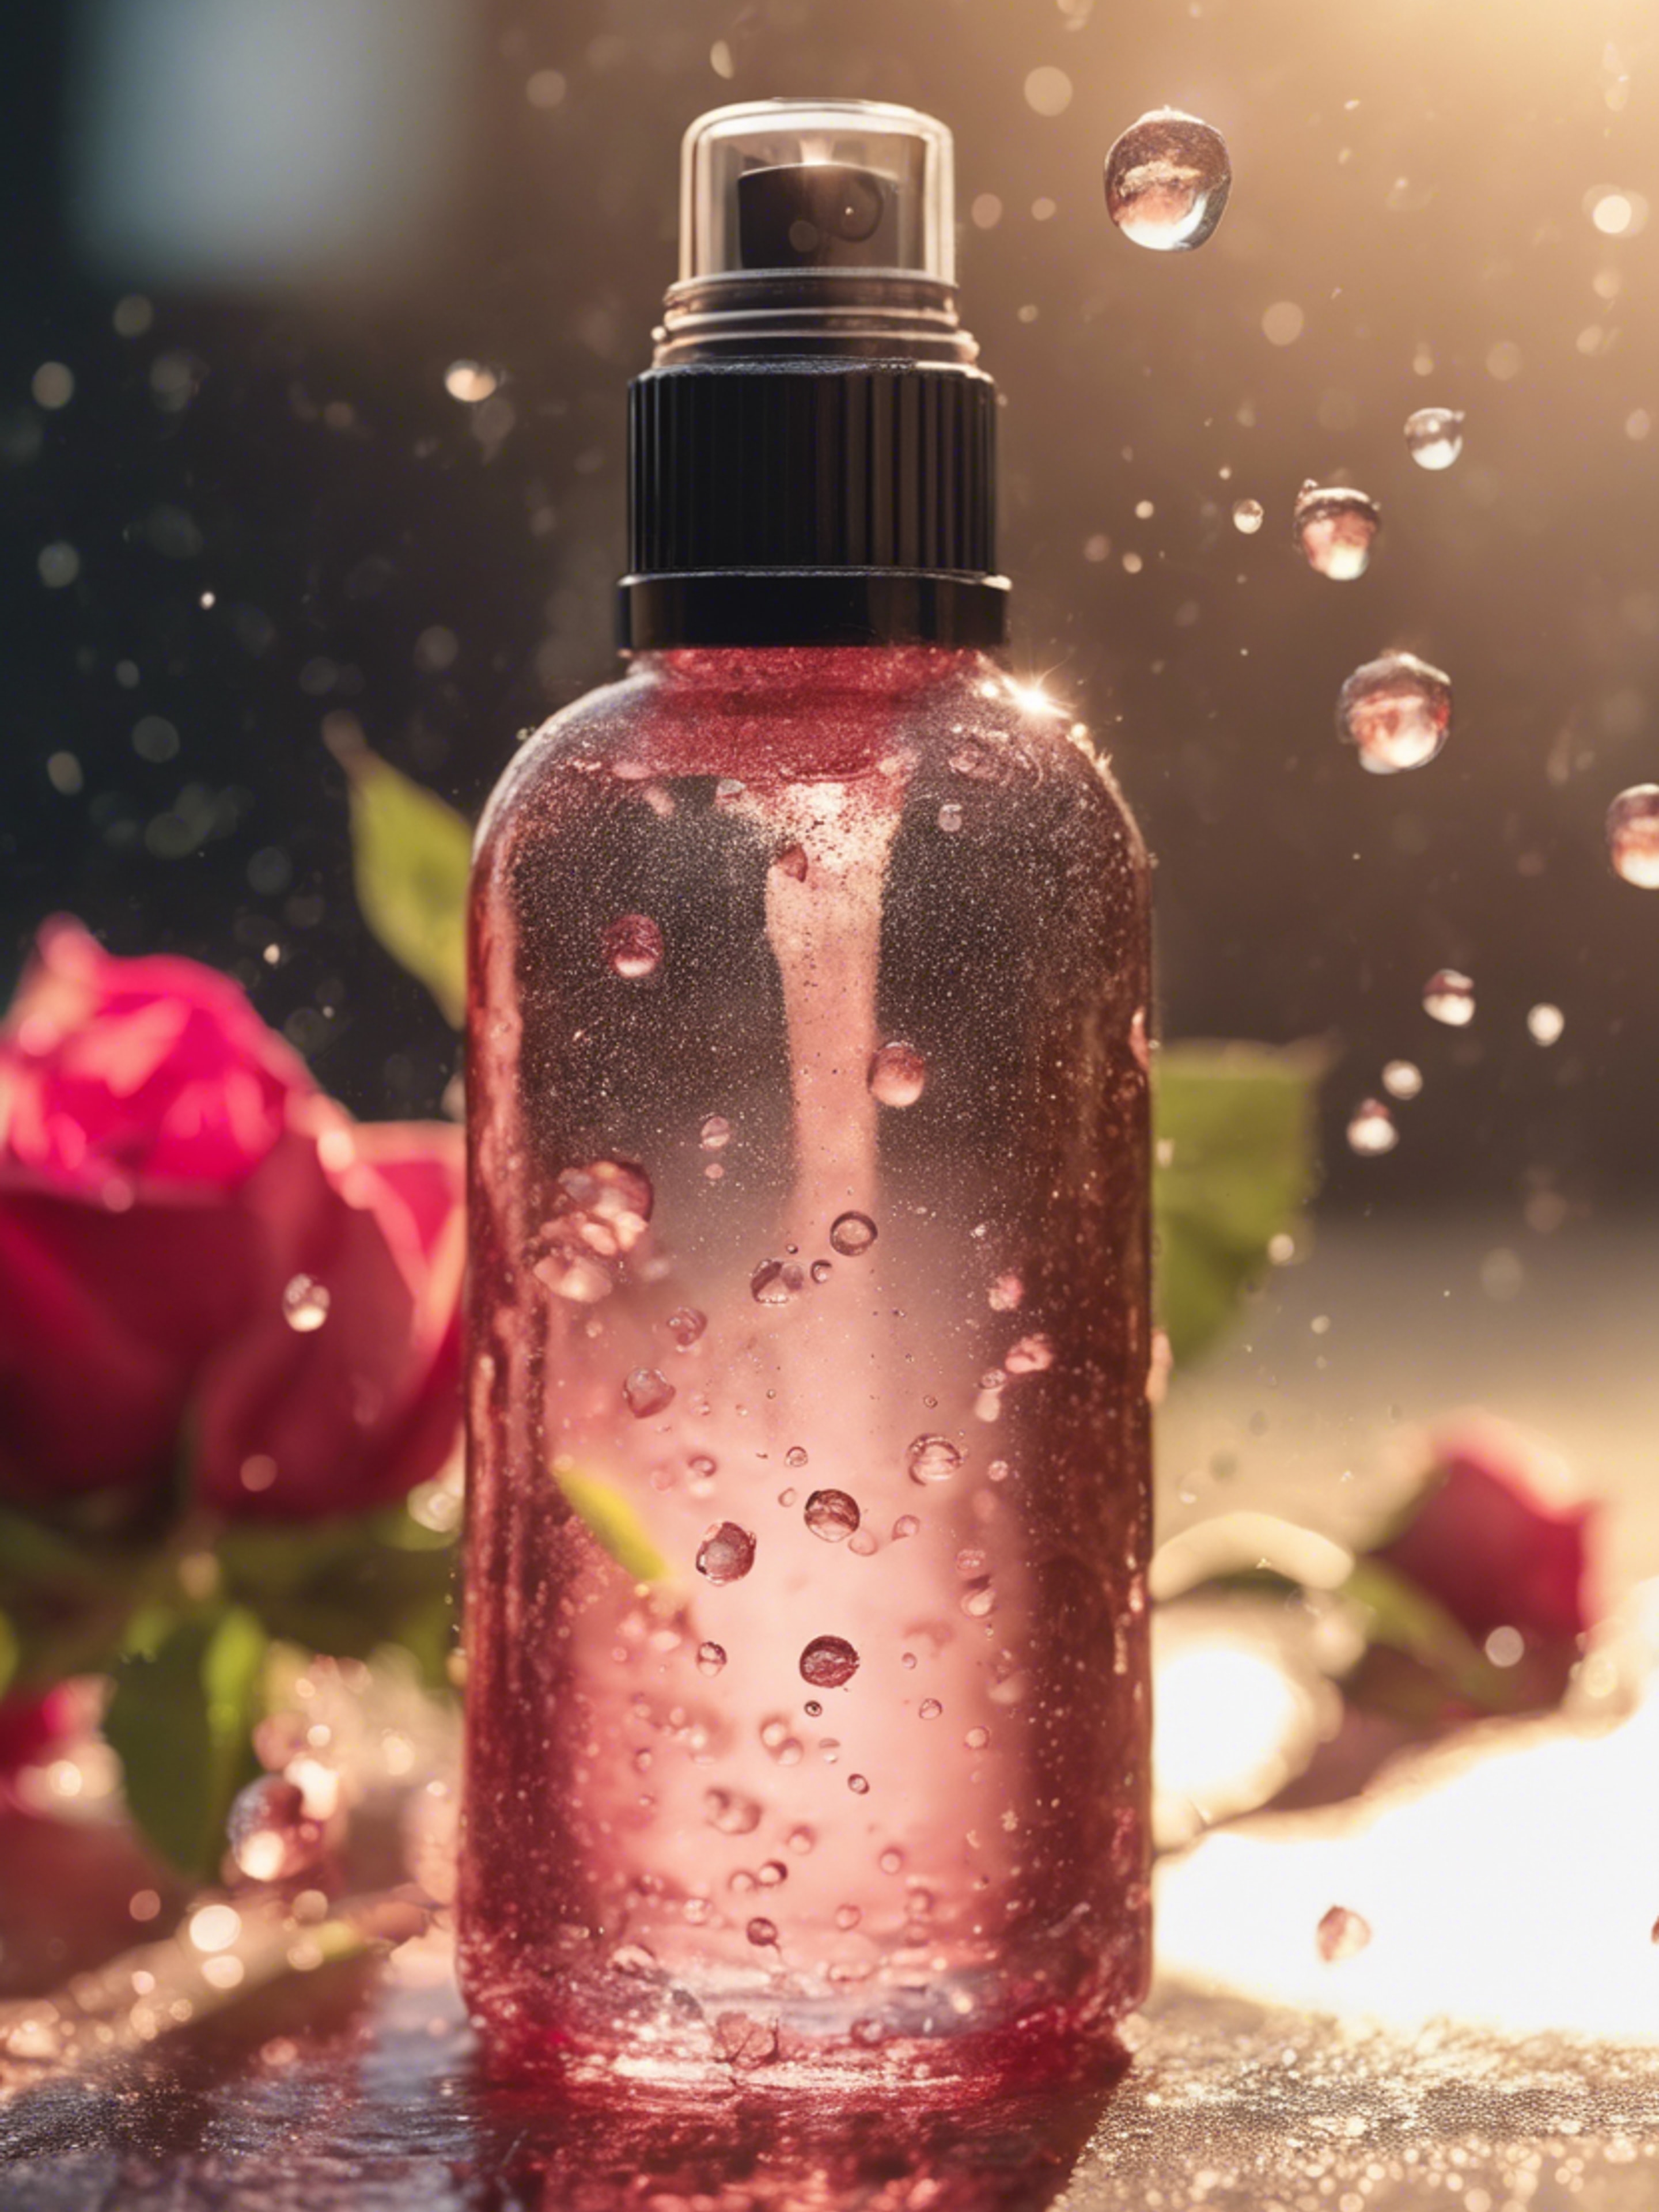 A refreshing spray bottle of rose water toner sprinkling droplets in the sunlight. Шпалери[f1b2cb92d7c7439692a8]